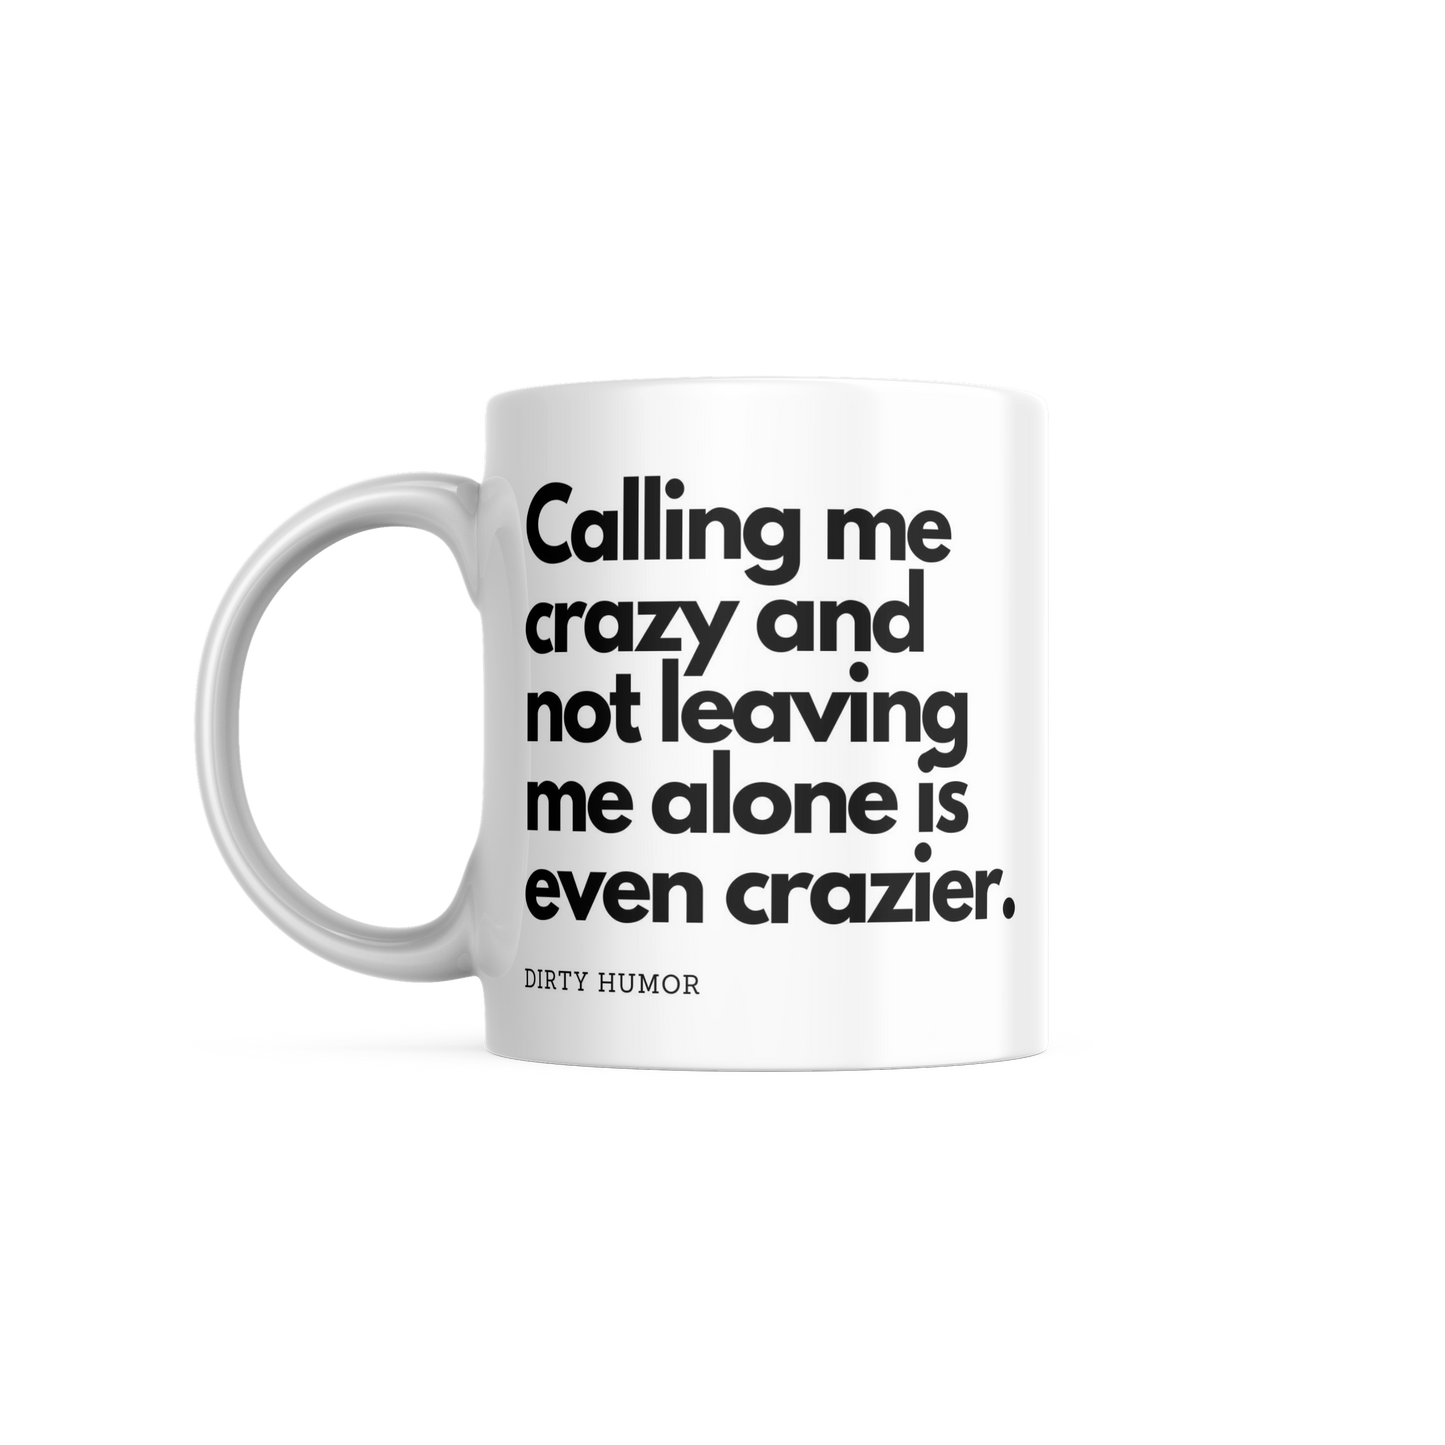 Calling me crazy and not leaving me alone is even crazier.